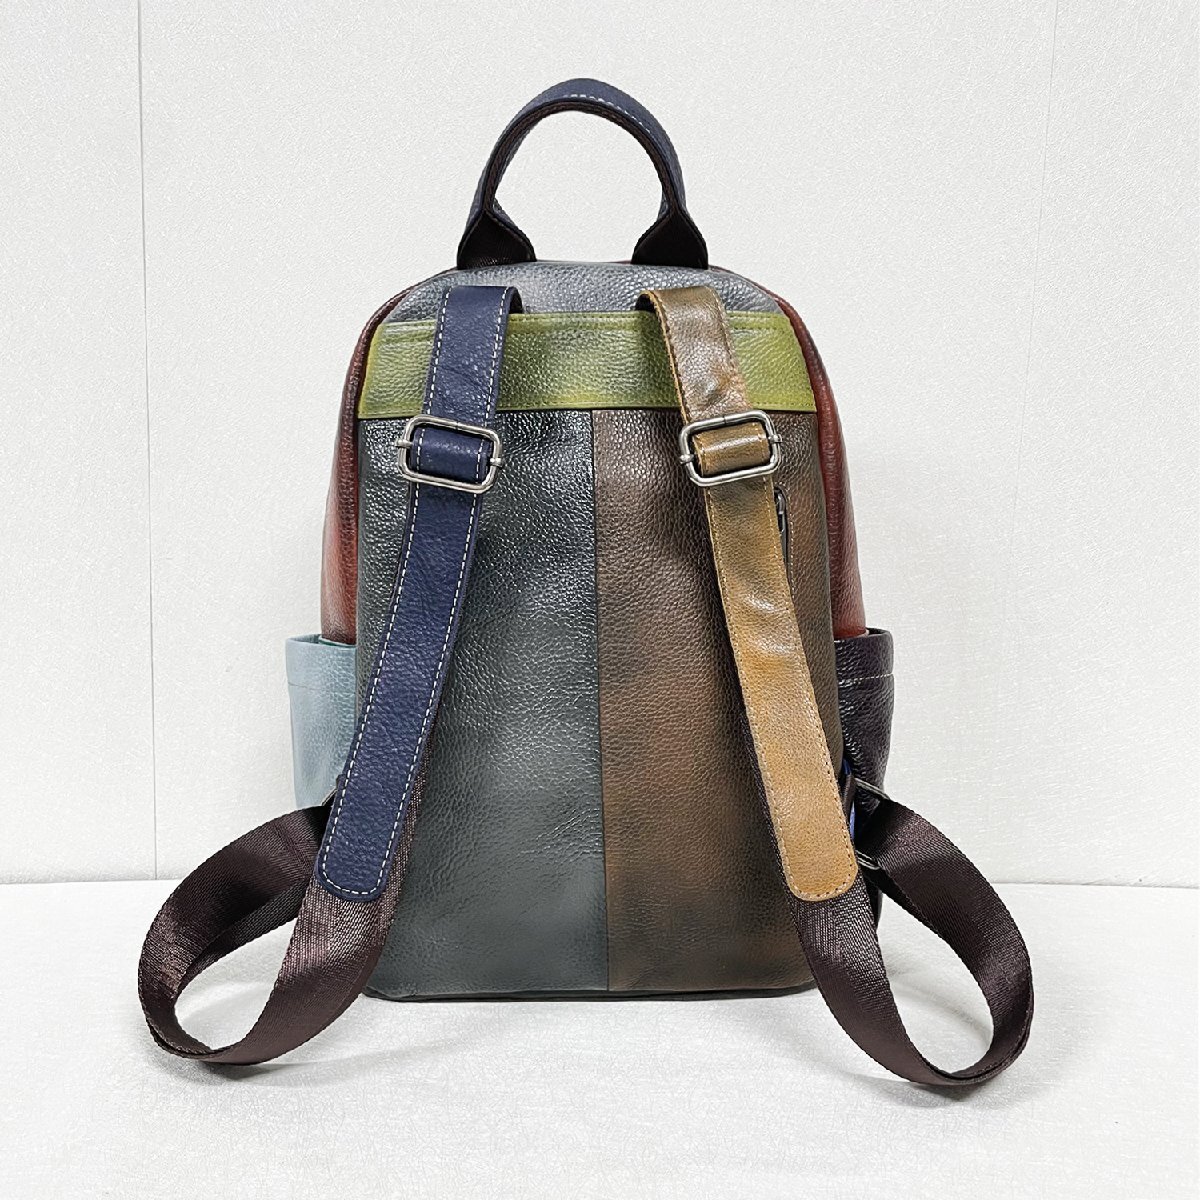  high class Europe made * regular price 12 ten thousand * BVLGARY a departure *RISELIN rucksack high quality cow leather leather piece . switch backpack bag high capacity everyday travel 